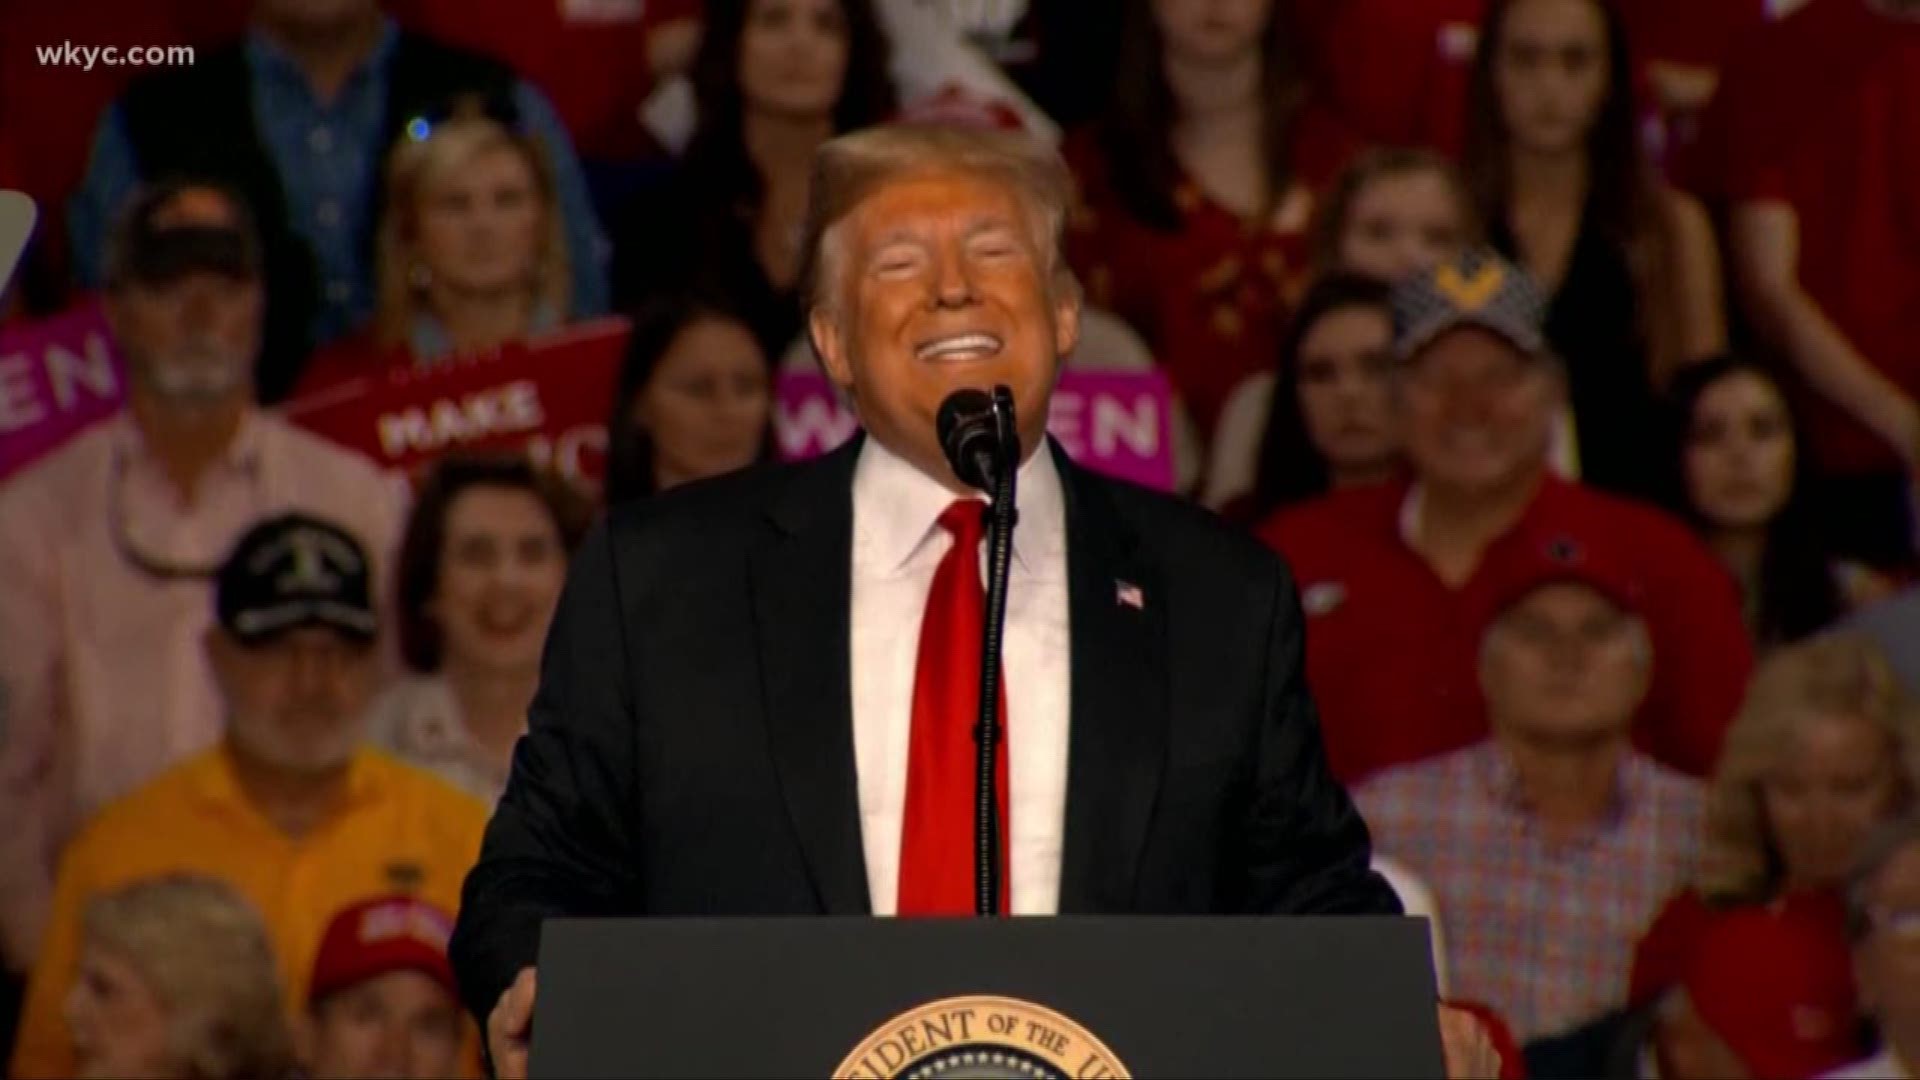 Nov. 5, 2018: One day before the midterm election, President Trump is holding three campaign rallies to generate support for the Republican party.